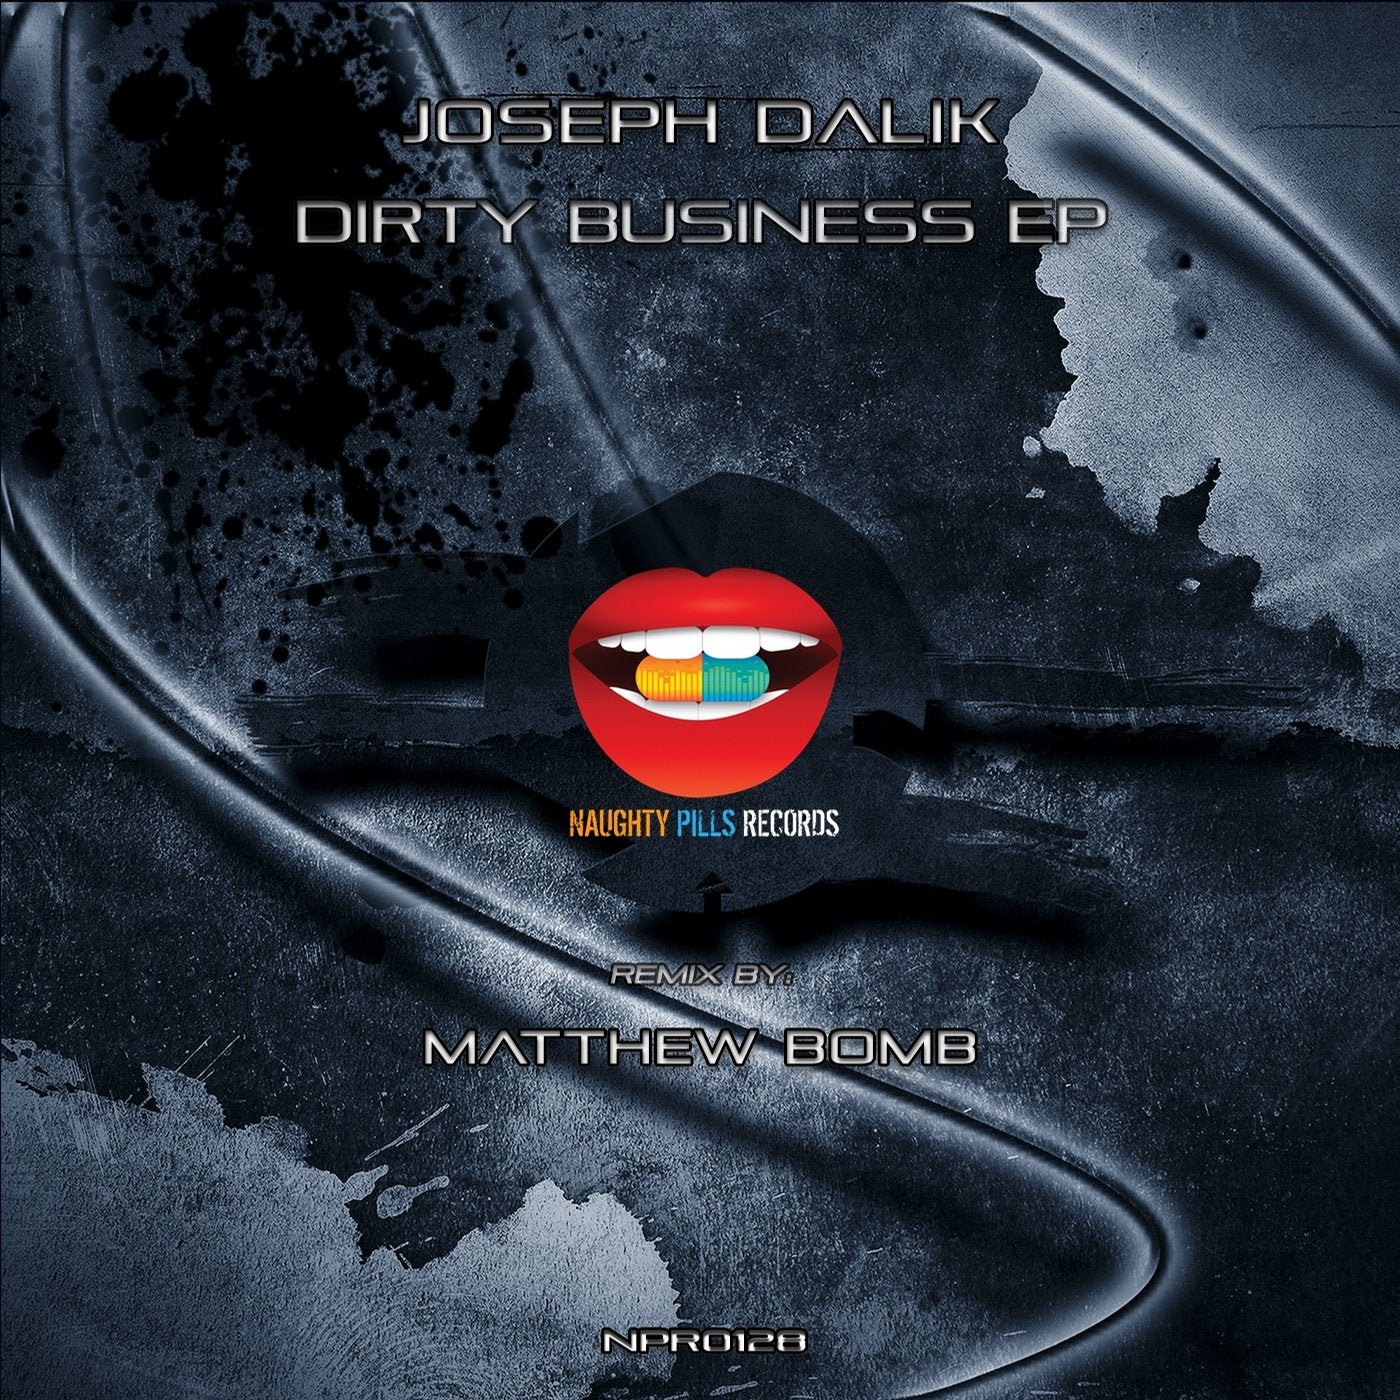 Dirty Business EP